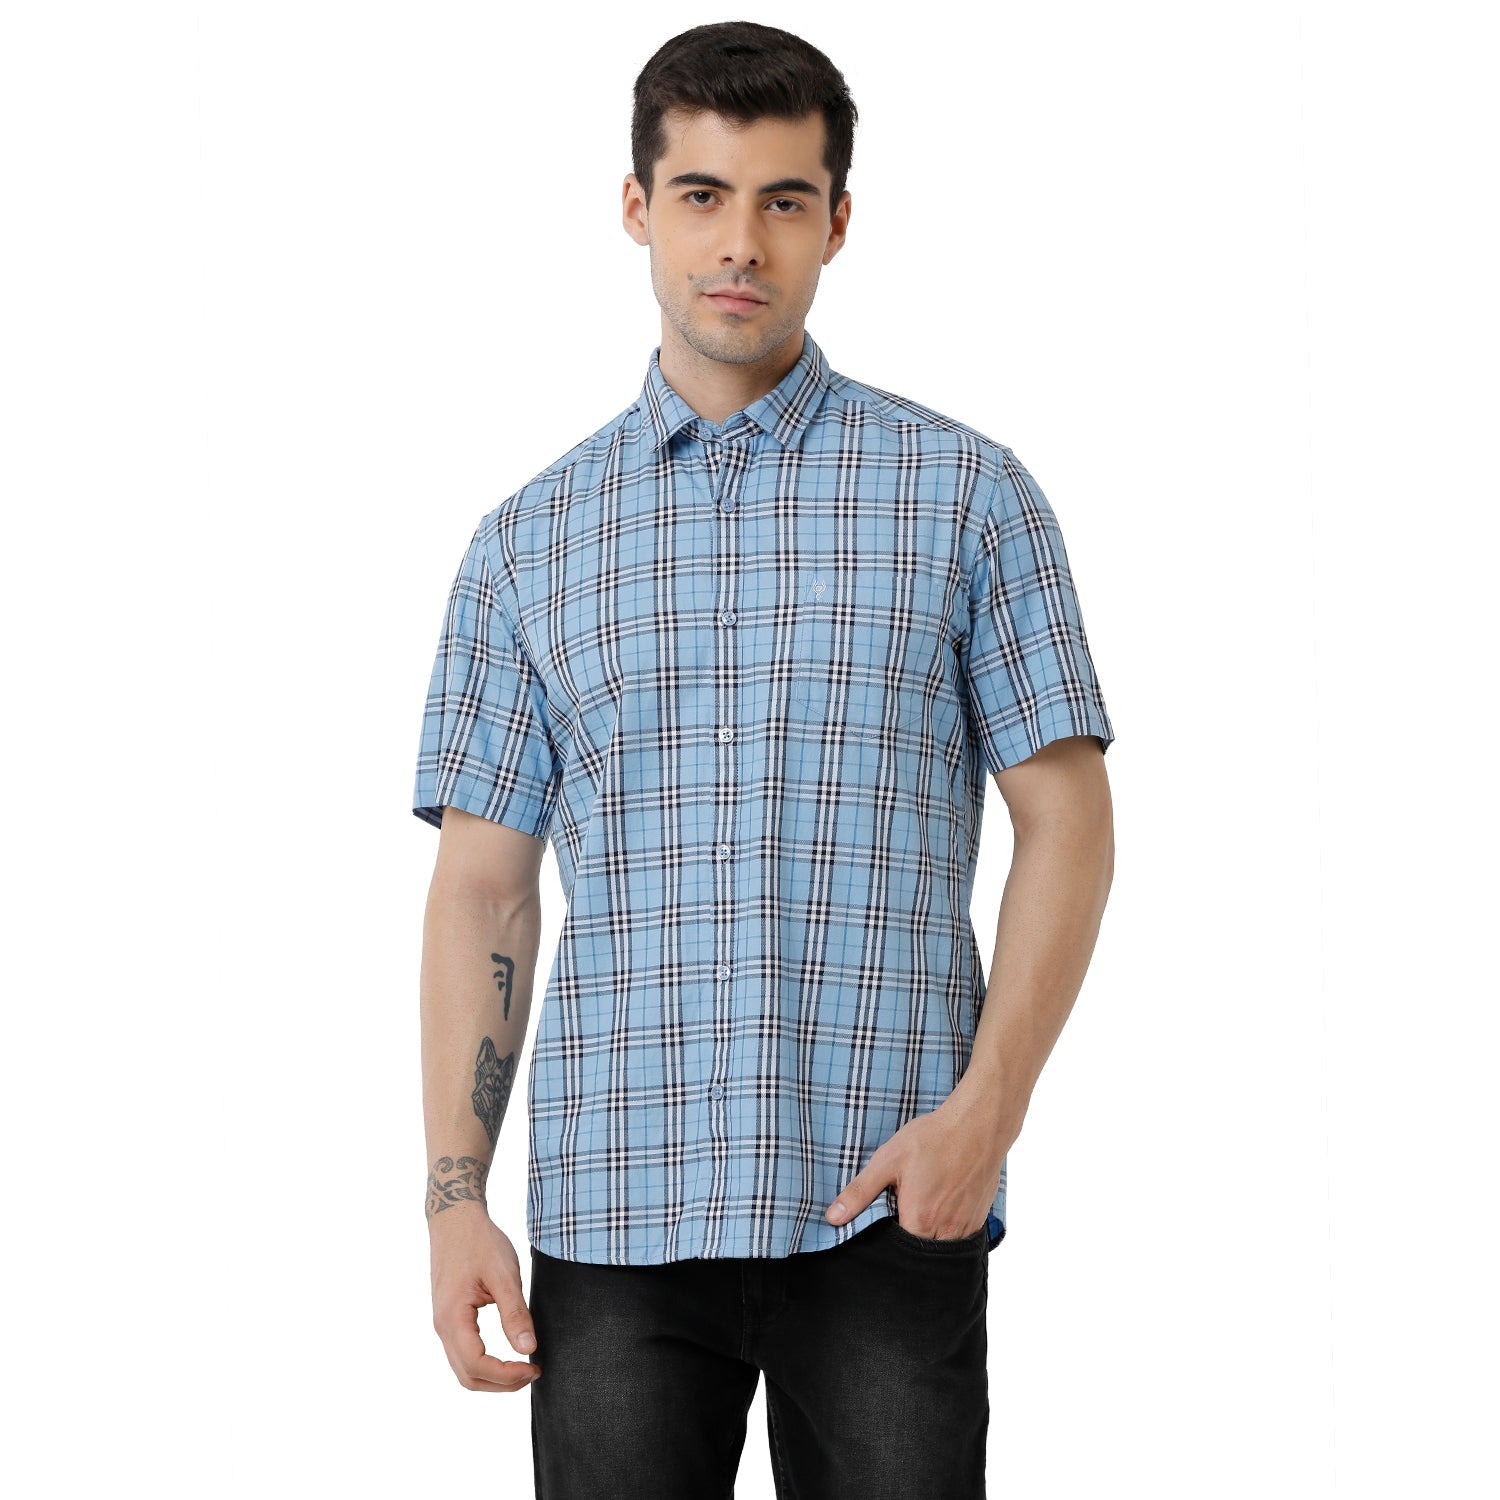 Classic Polo Mens Checked Slim Fit Half Sleeve Azure Blue Color Shirt - SN1-121 A Shirts Classic Polo 